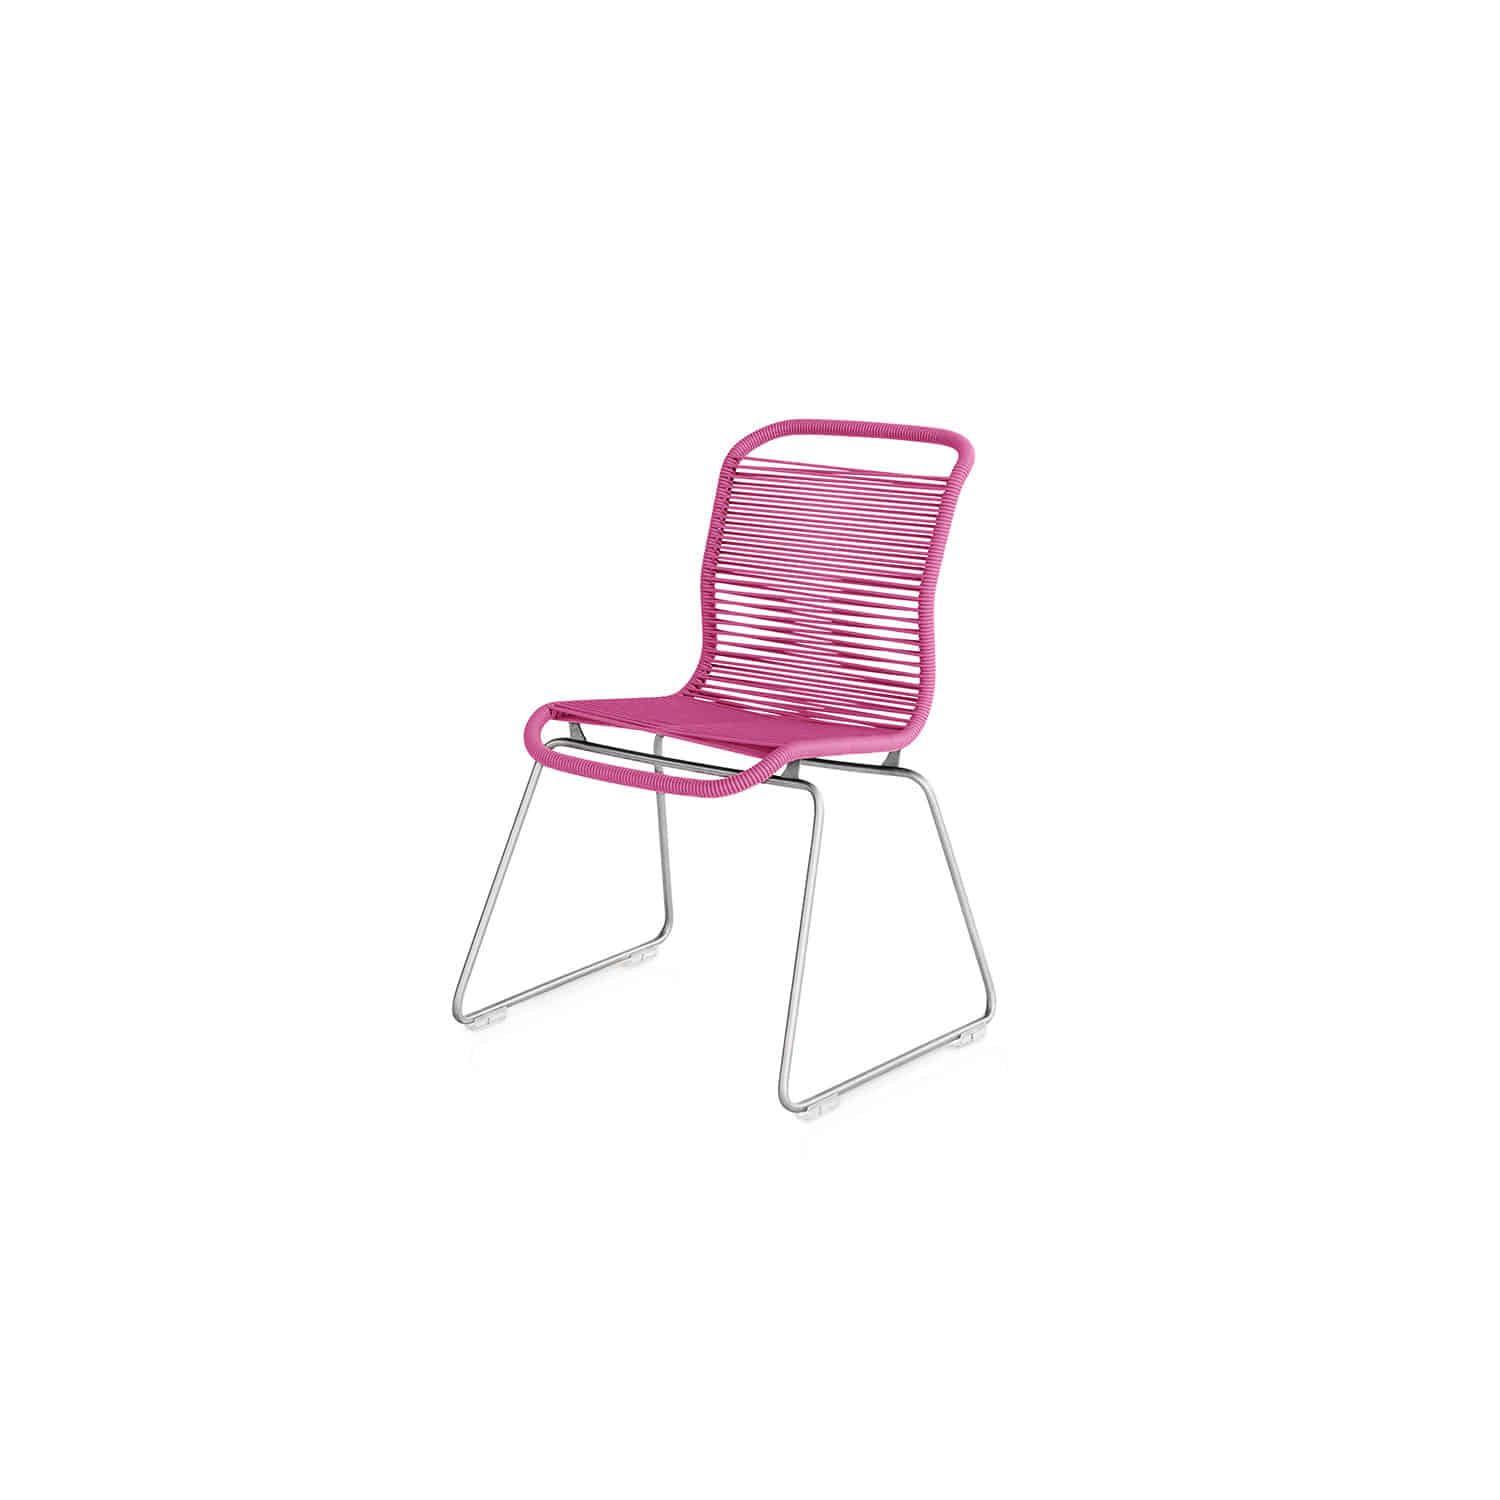 Limited edition * Panton one kids, Pink